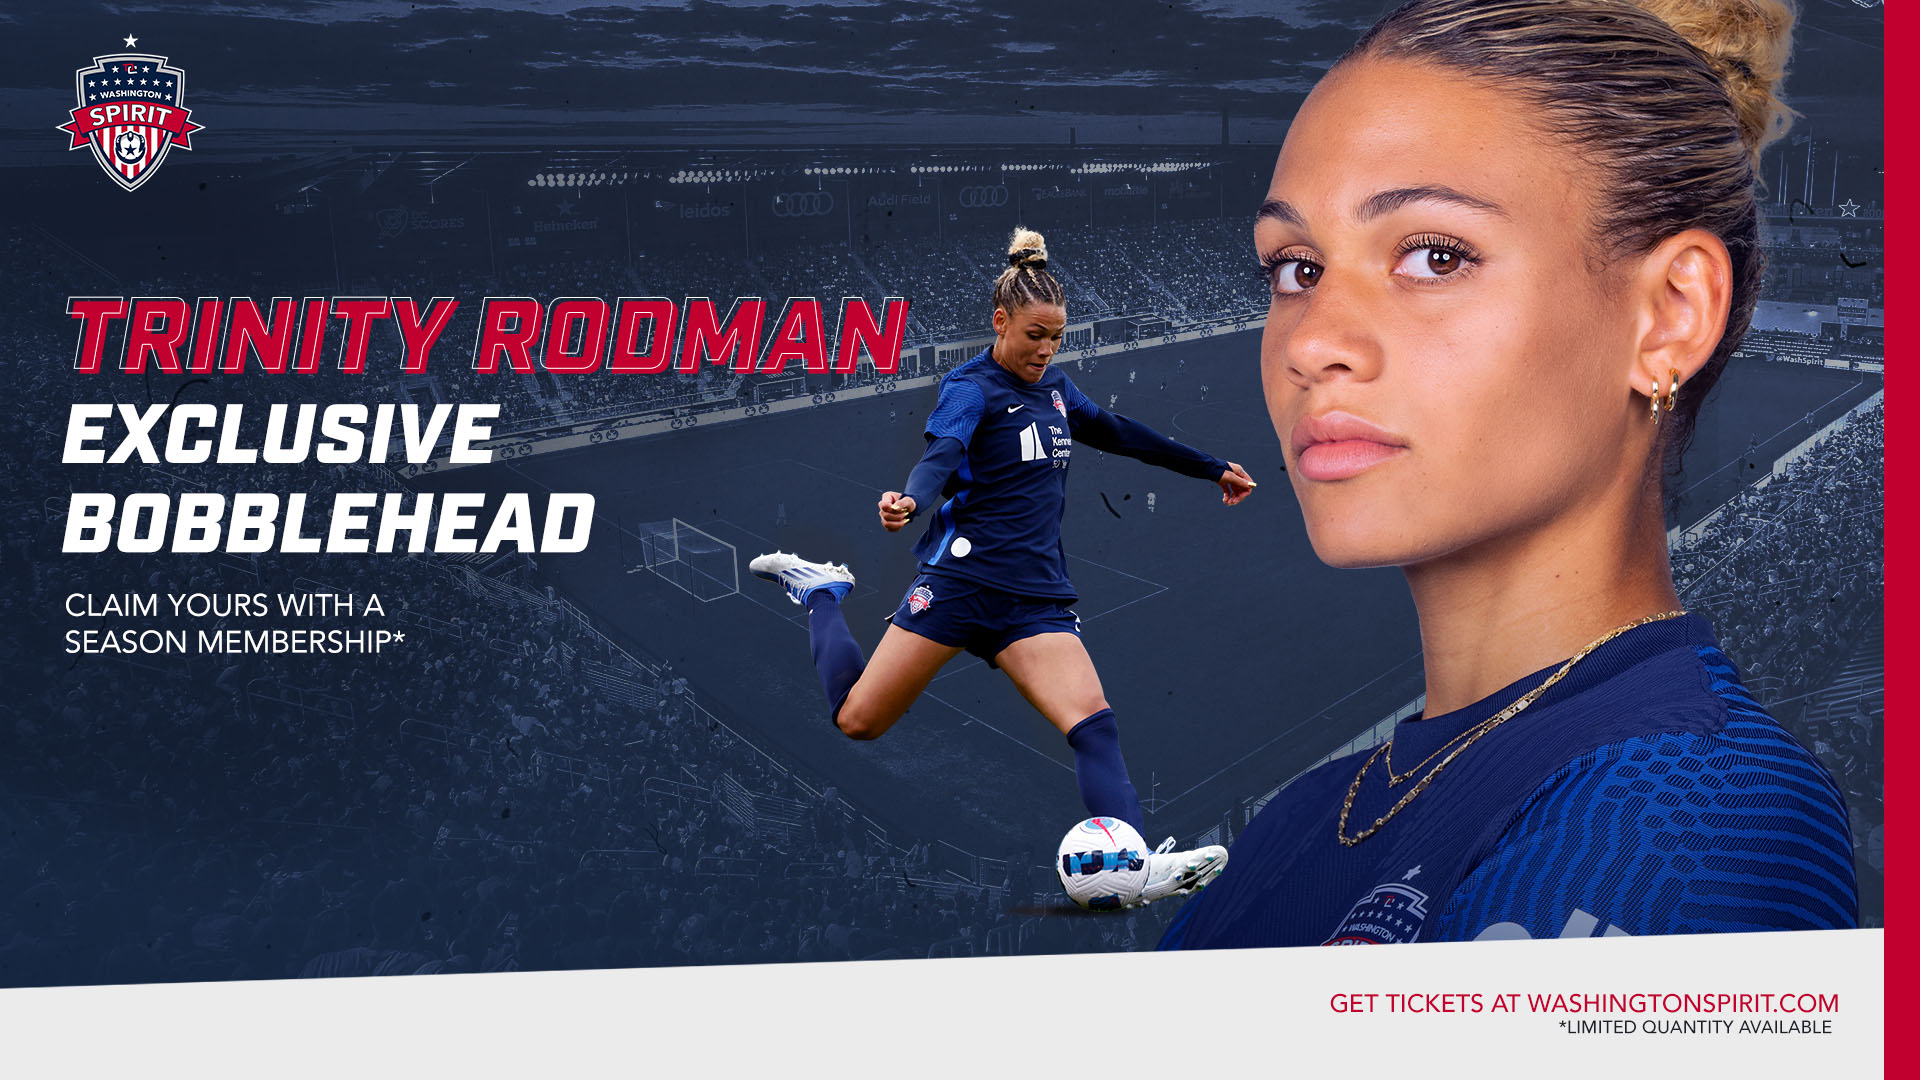 Washington Spirit to Release First-Ever Spirit Player Bobblehead, featuring Trinity Rodman Featured Image